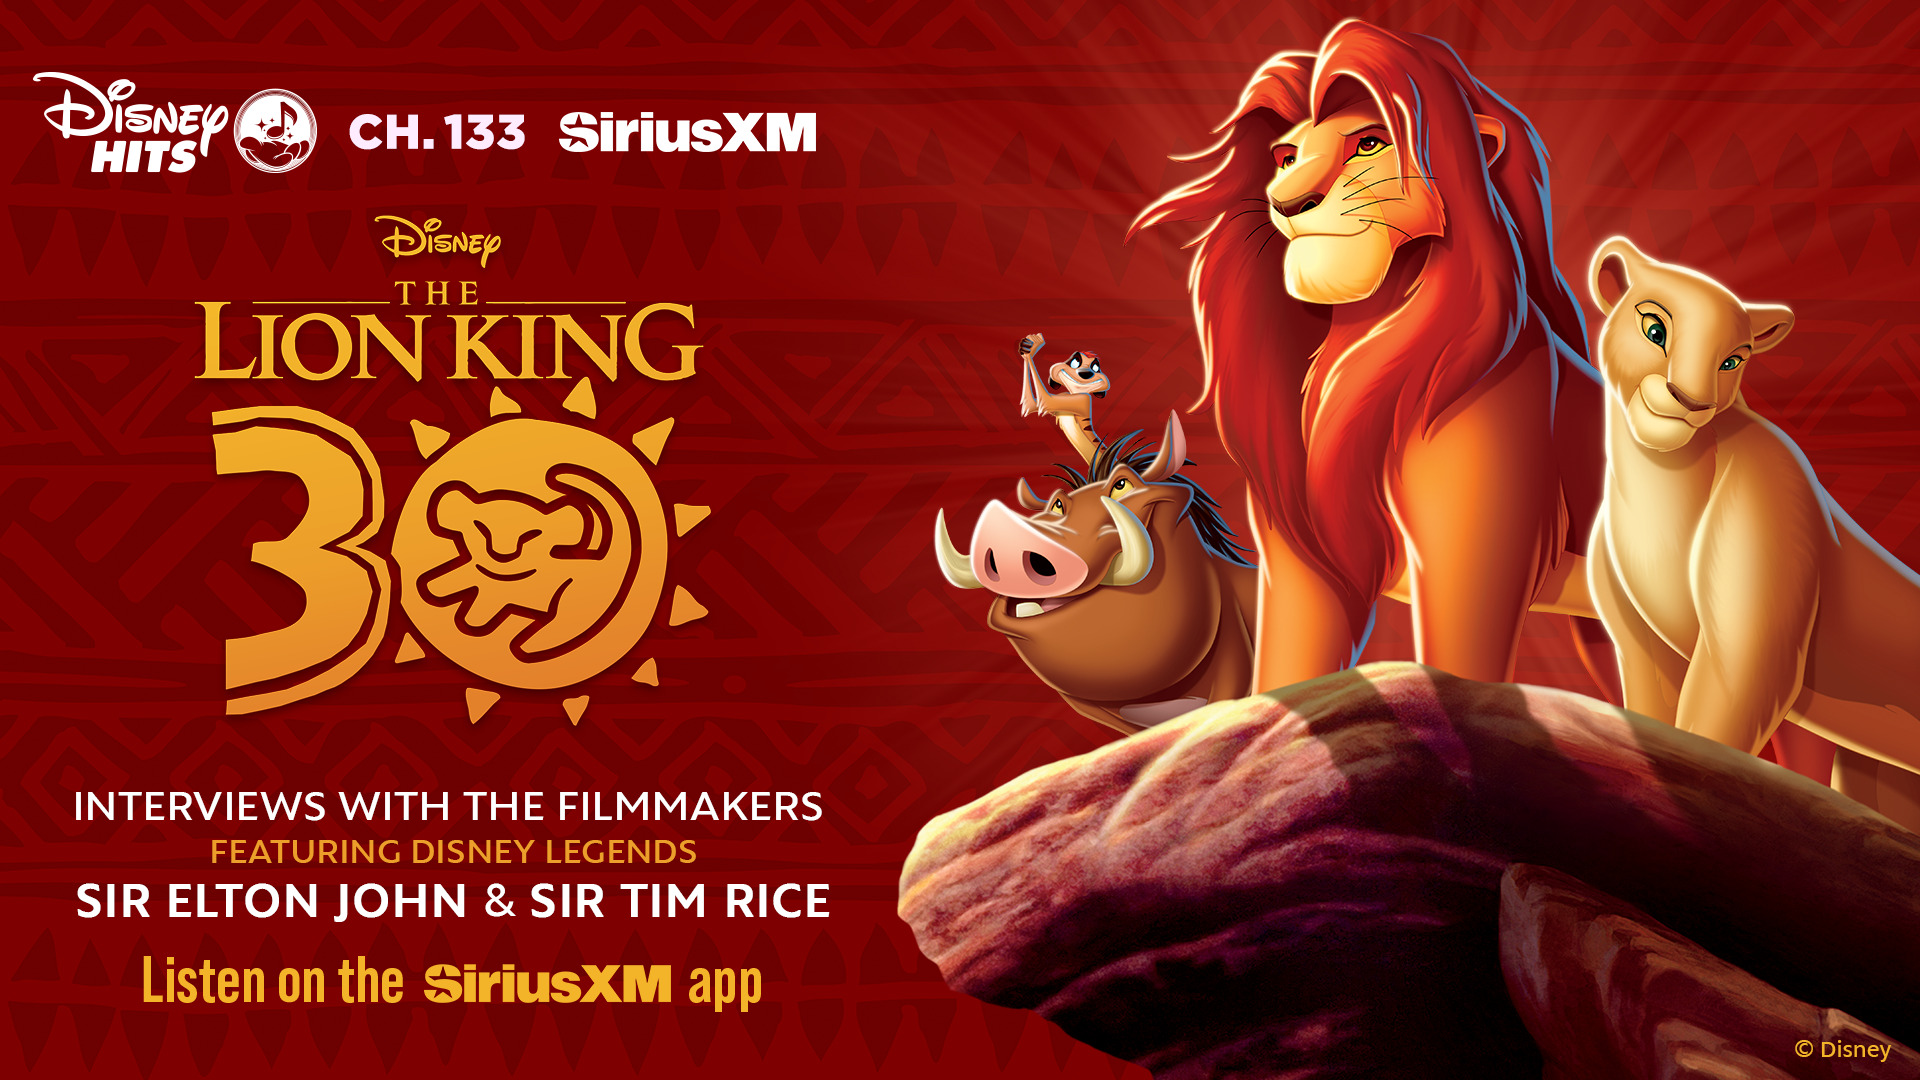 Lion King 30 special on SiriusXM's Disney Hits channel